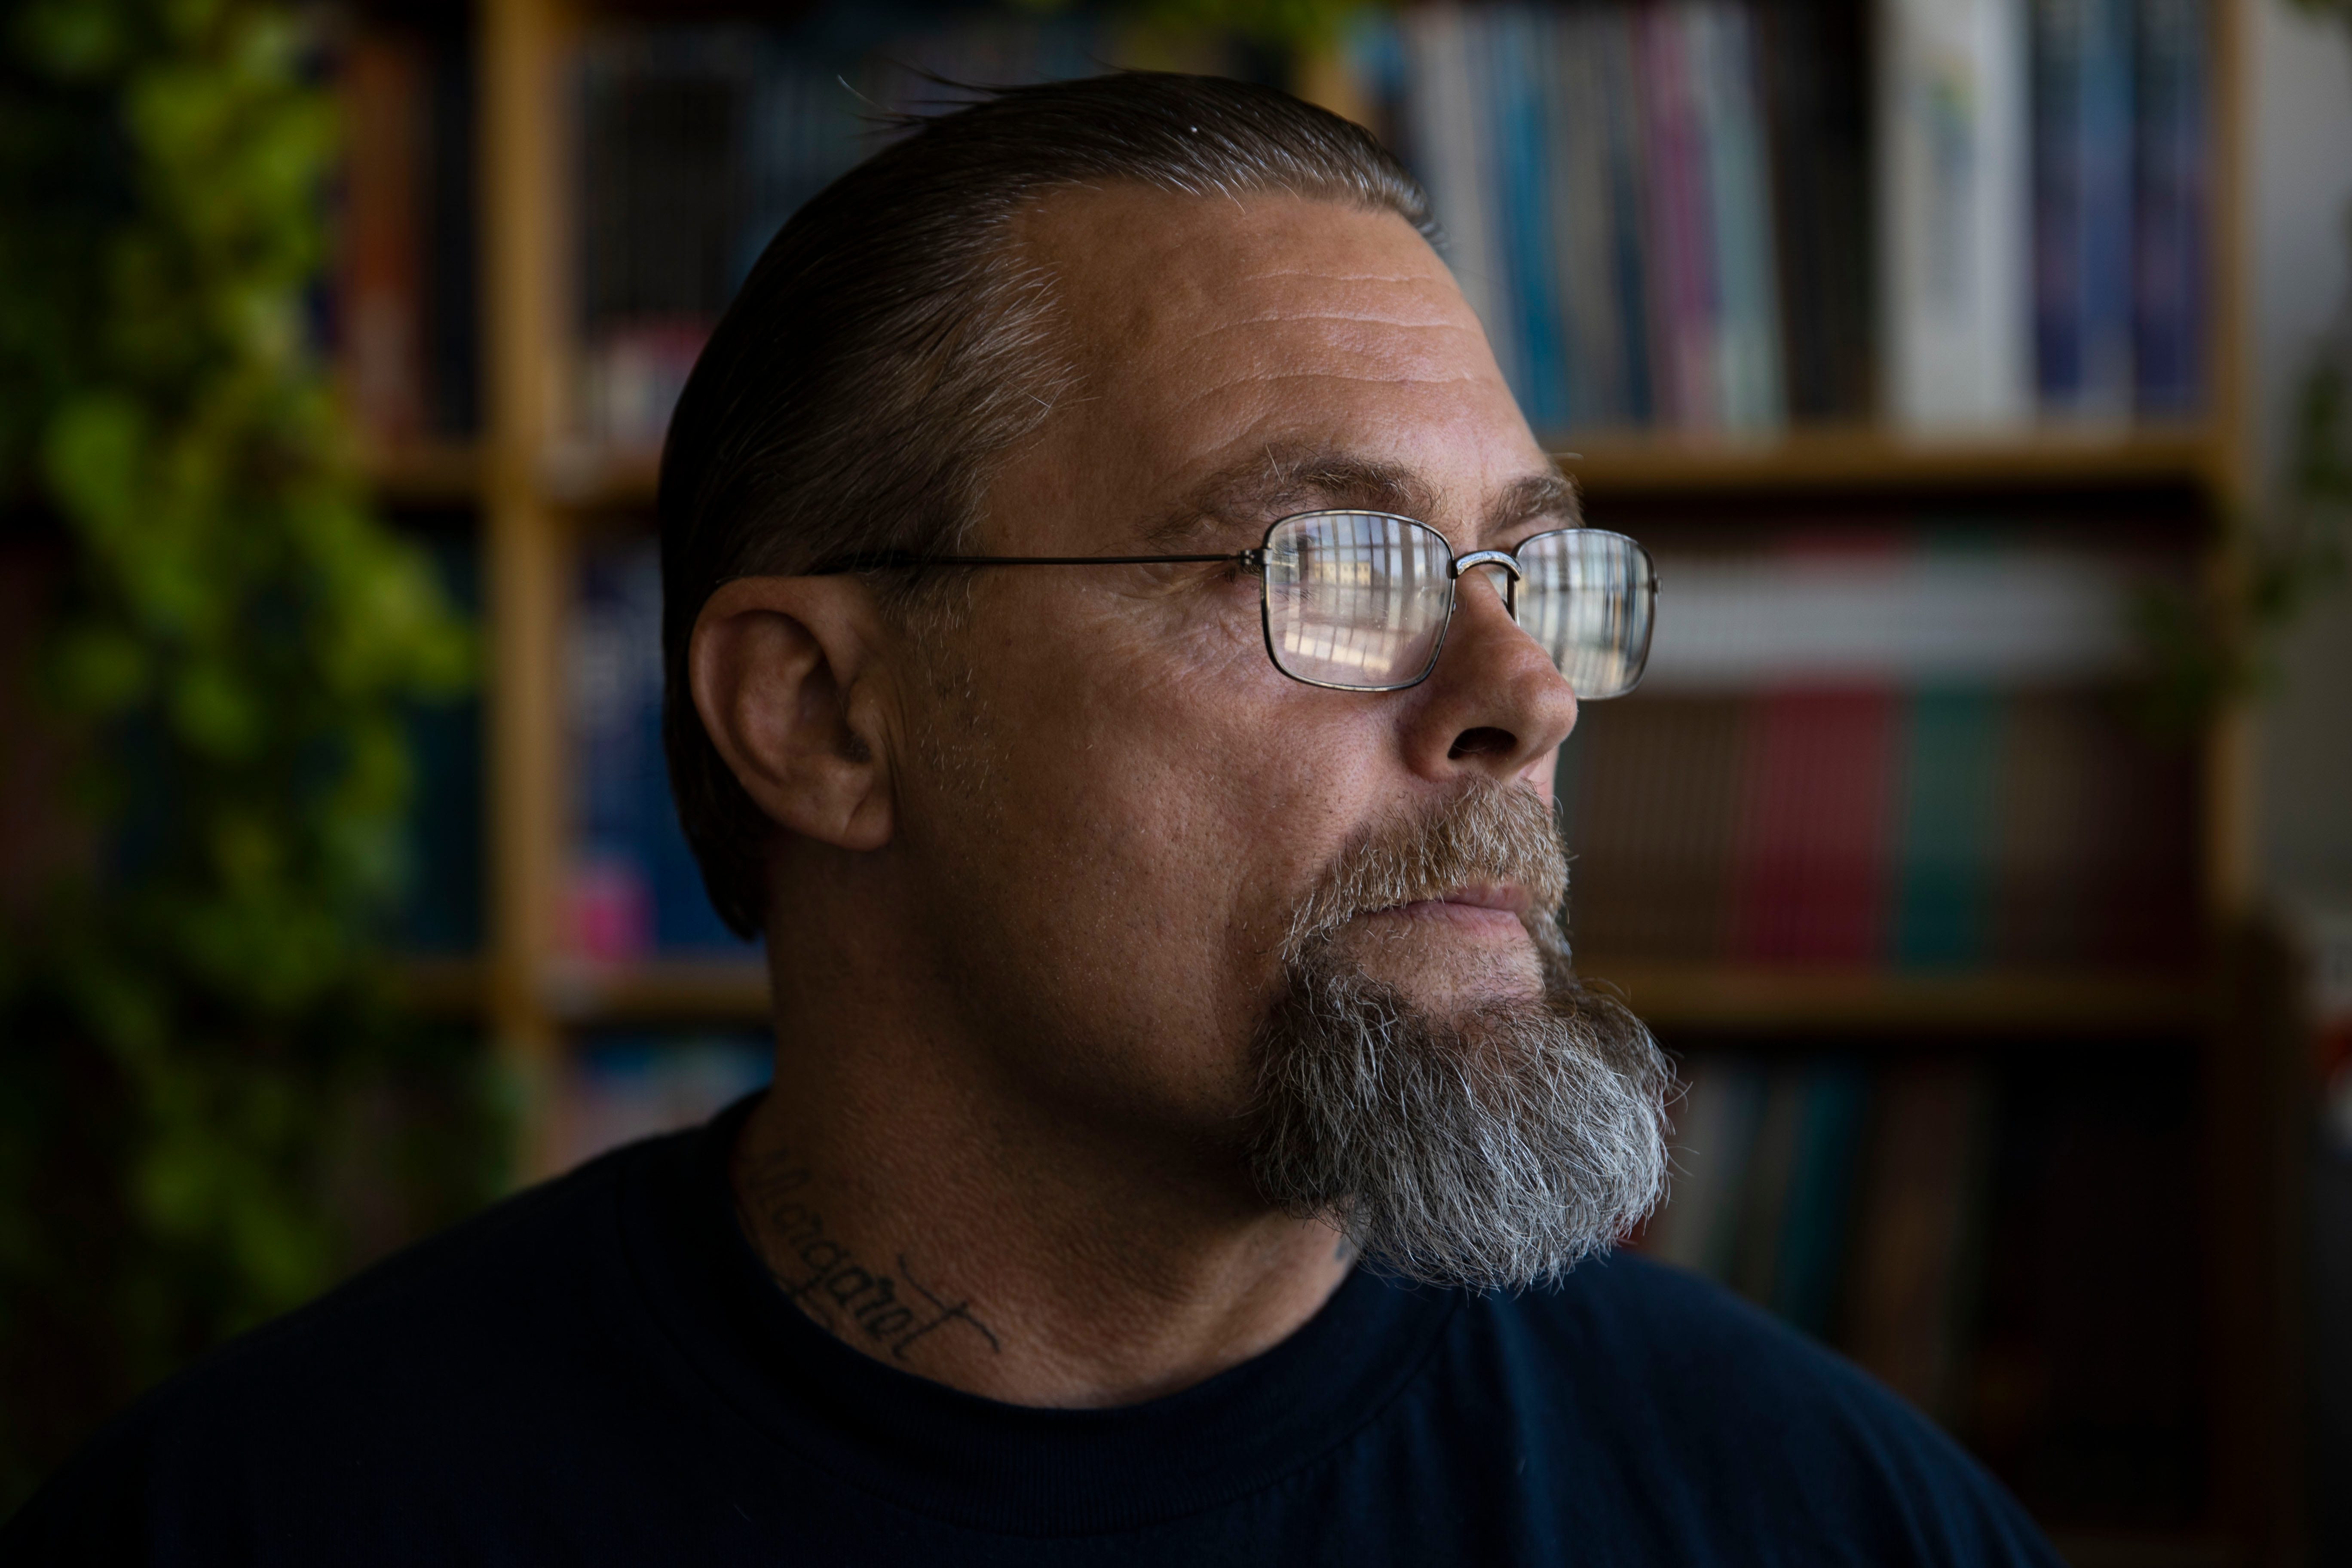 Jeffry Williams, who never really attended school as a child, is taking reading classes while incarcerated at Oregon State Correctional Institution in Salem.